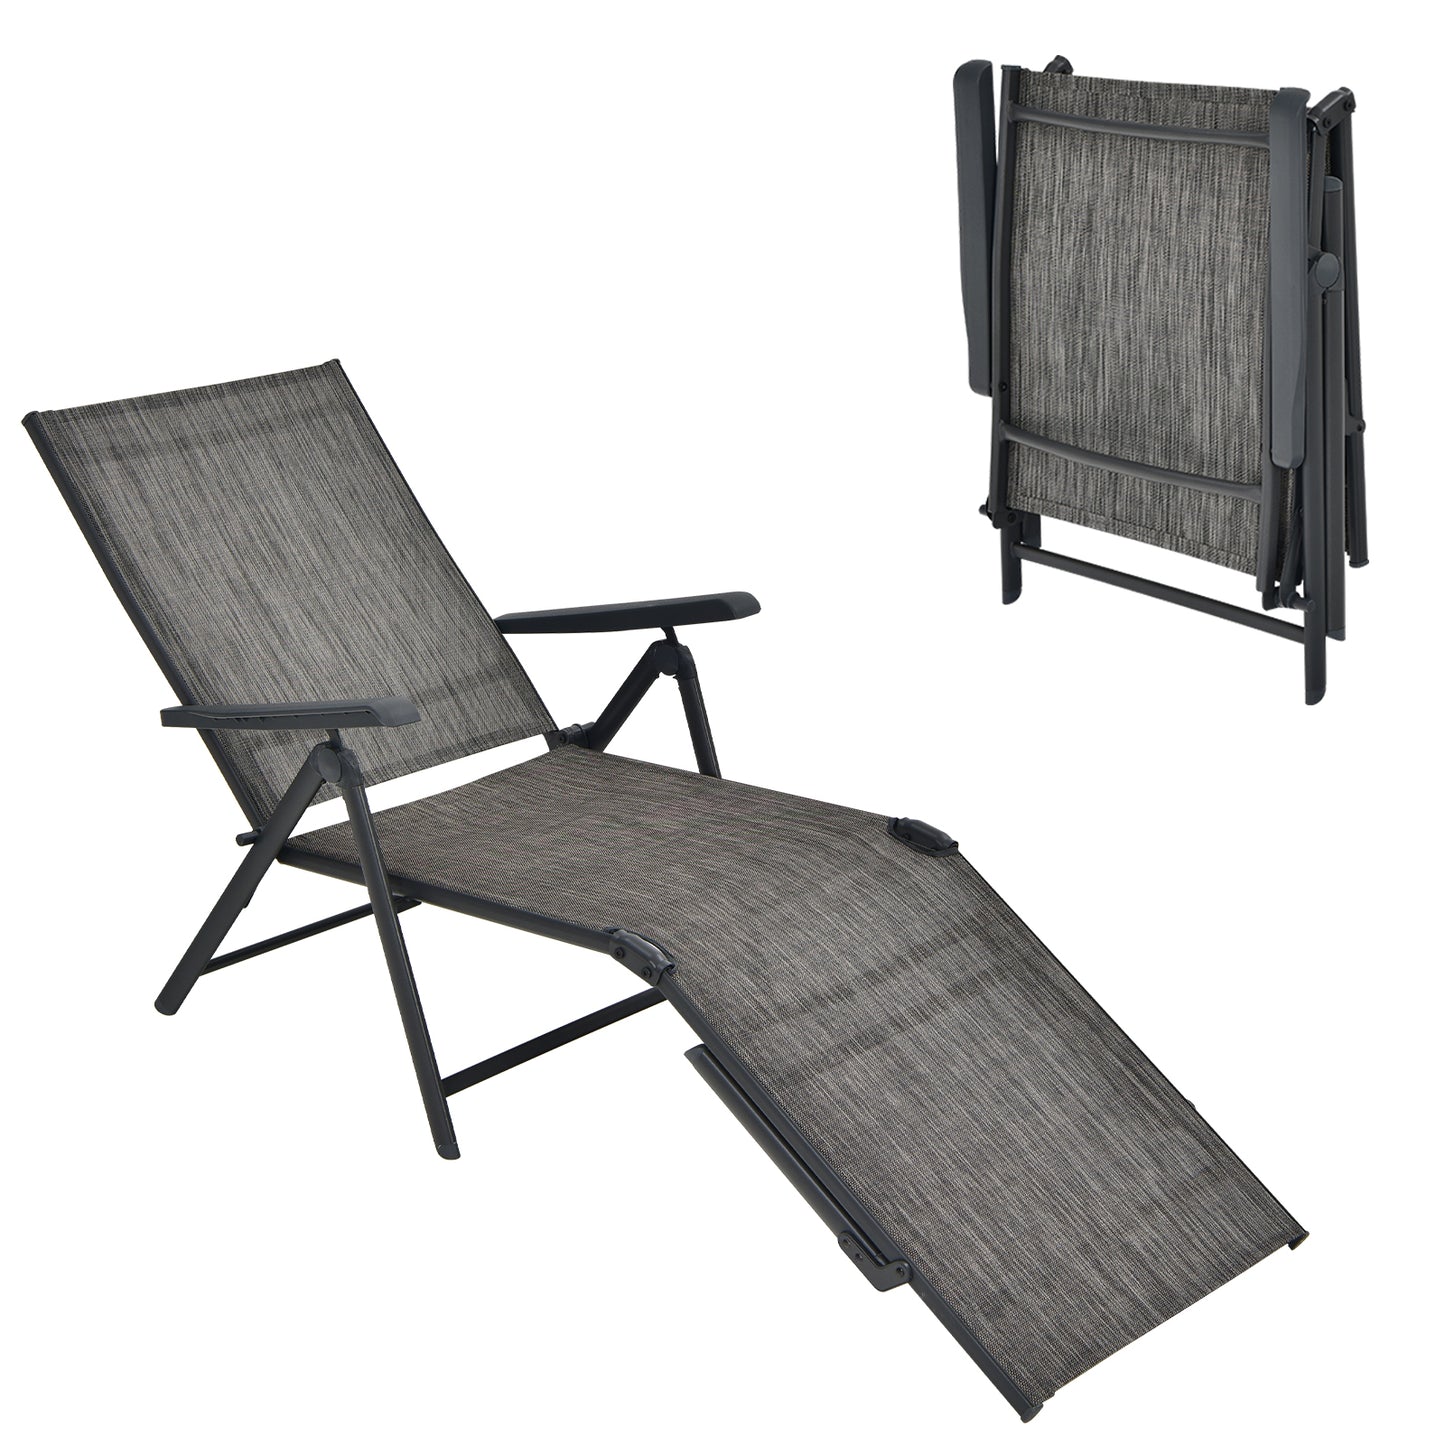 Patio Foldable Chaise Lounge Chair with Backrest and Footrest-Gray